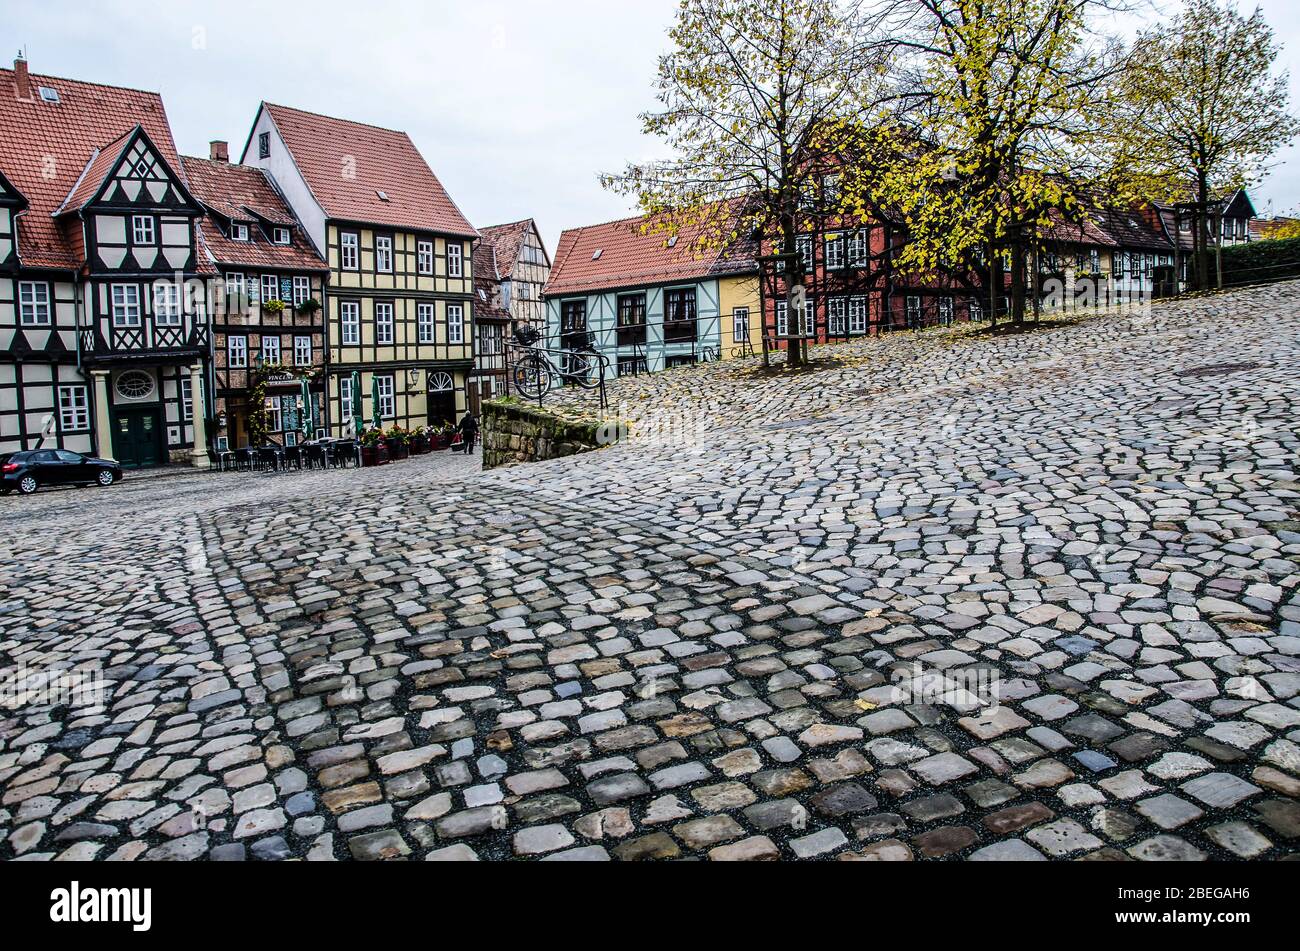 Quedlinburg a town situated just north of the Harz mountains In 1994, the castle, church and old town were added to the UNESCO World Heritage List. Stock Photo